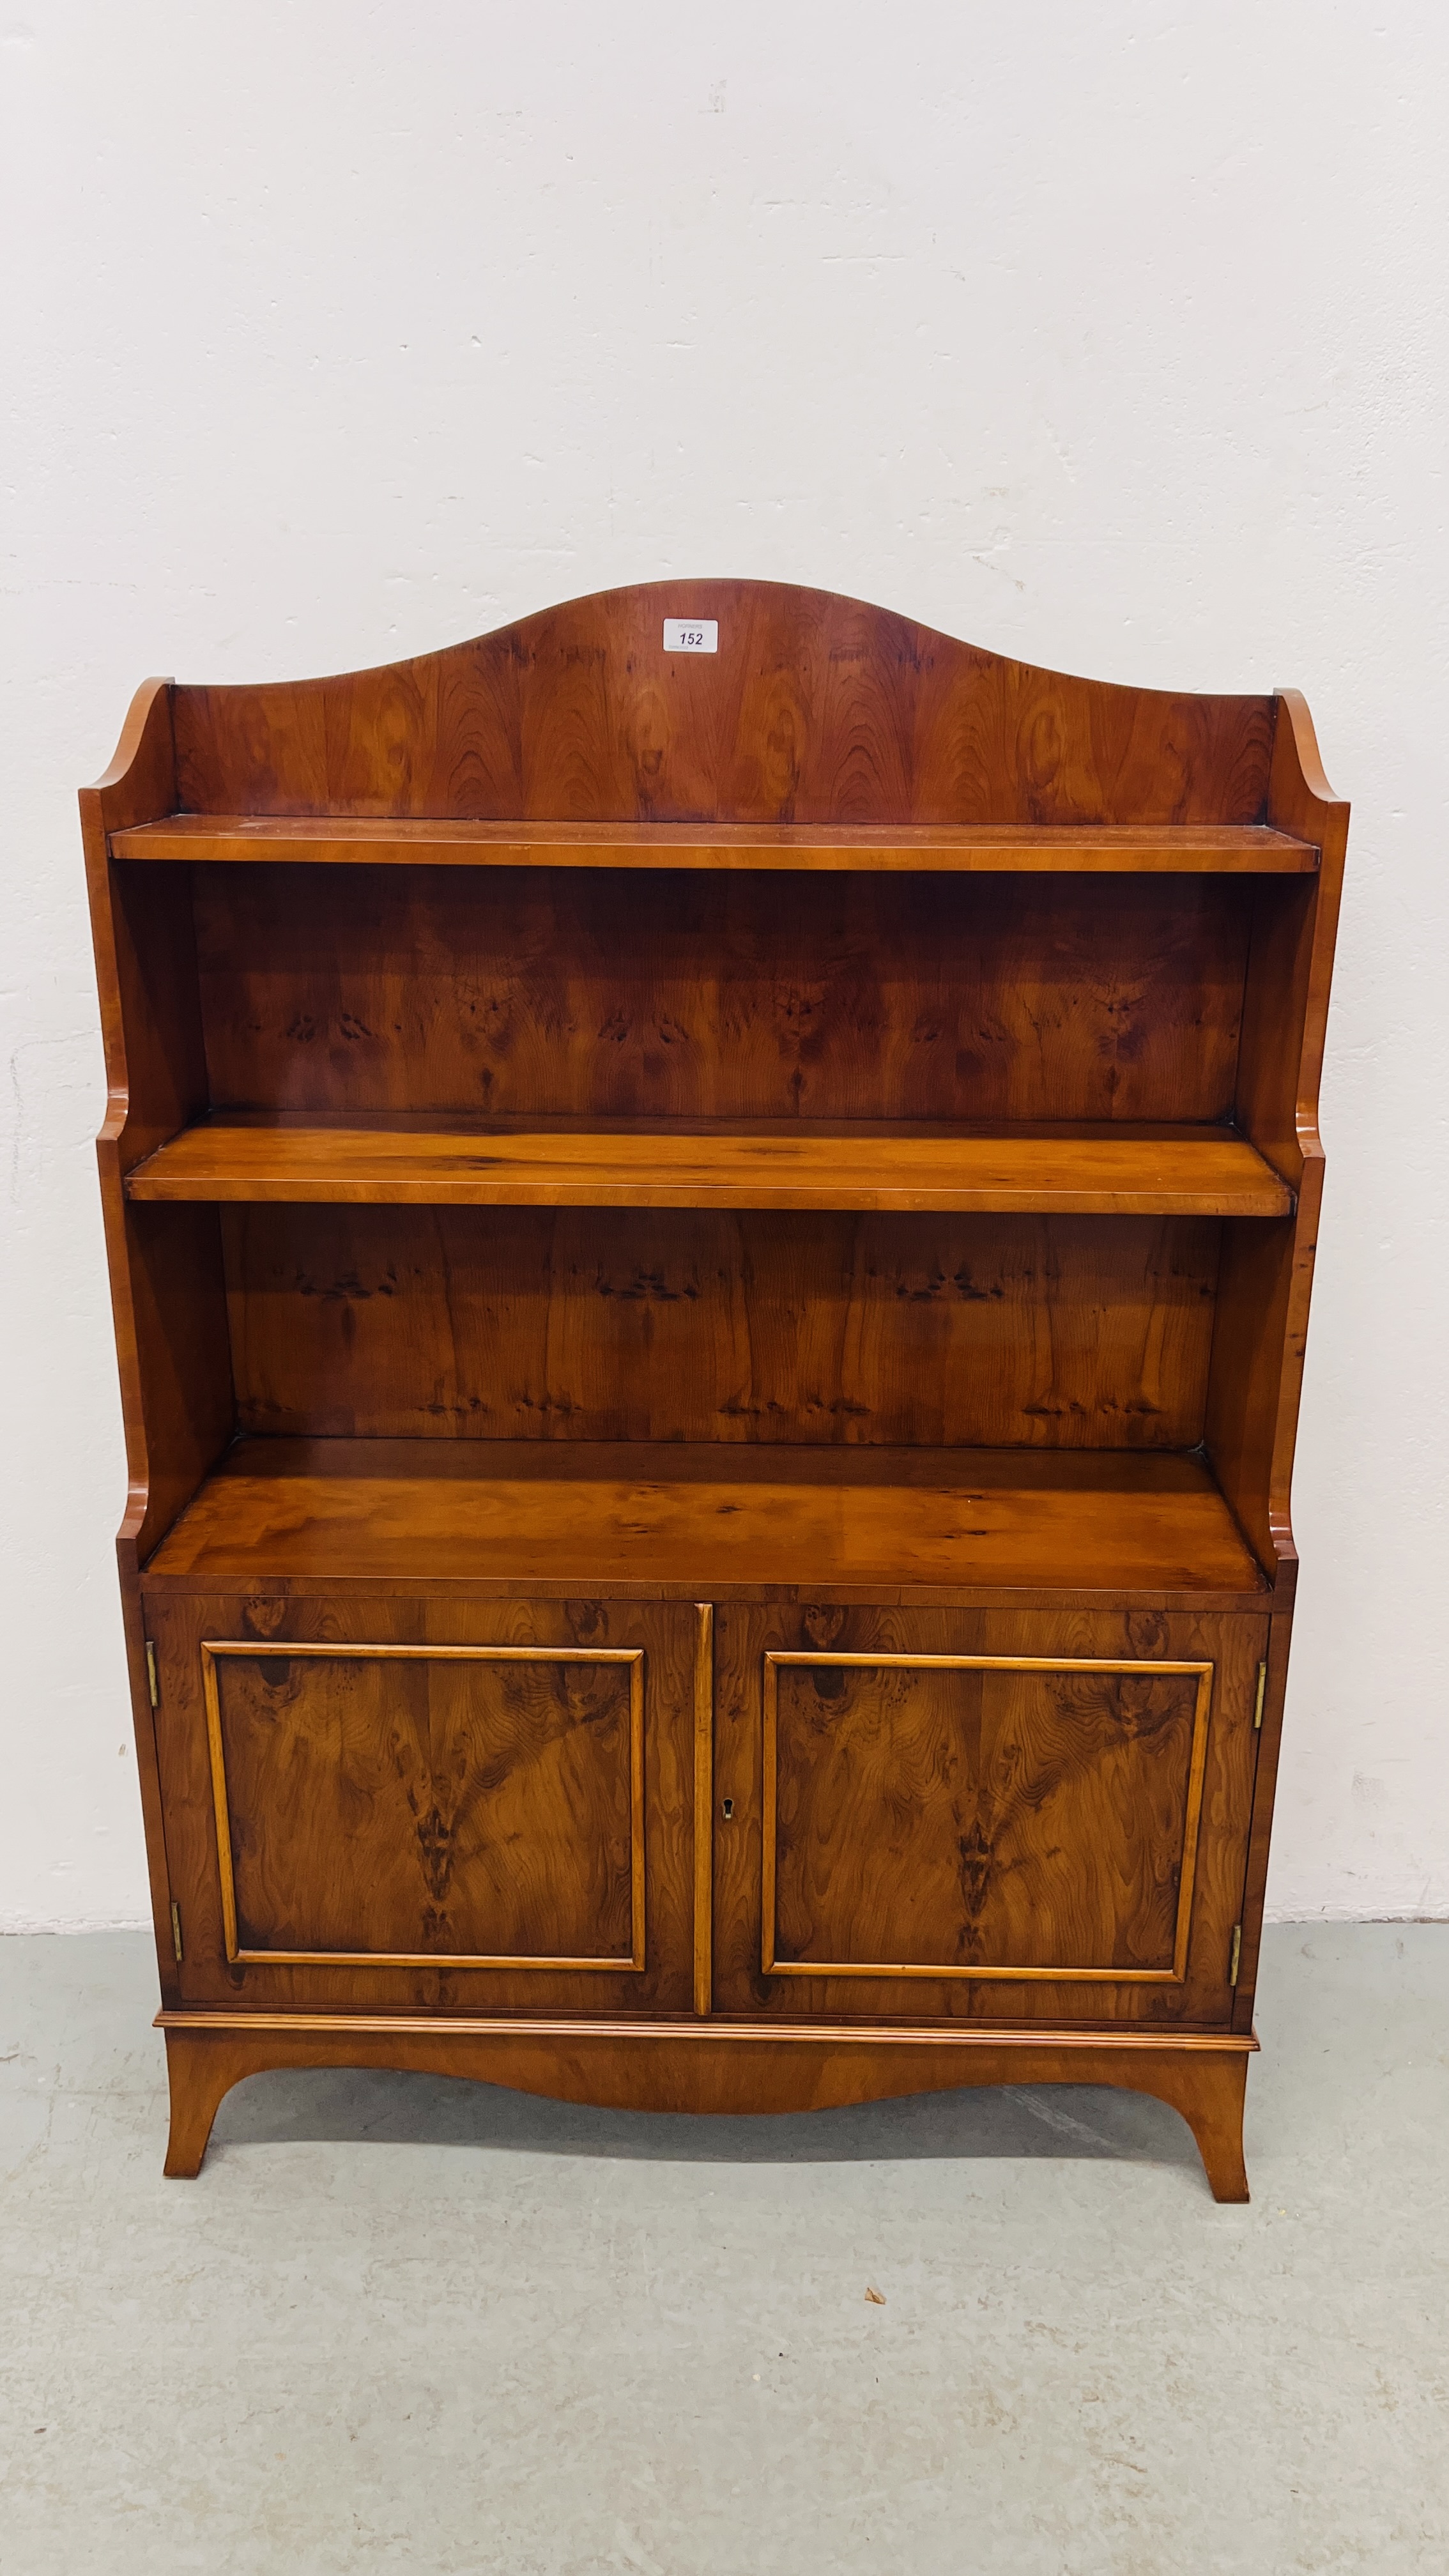 A GOOD QUALITY REPRODUCTION YEW WOOD FINISH BOOKSHELF WITH CABINET TO BASE WIDTH 85CM. DEPTH 27CM.